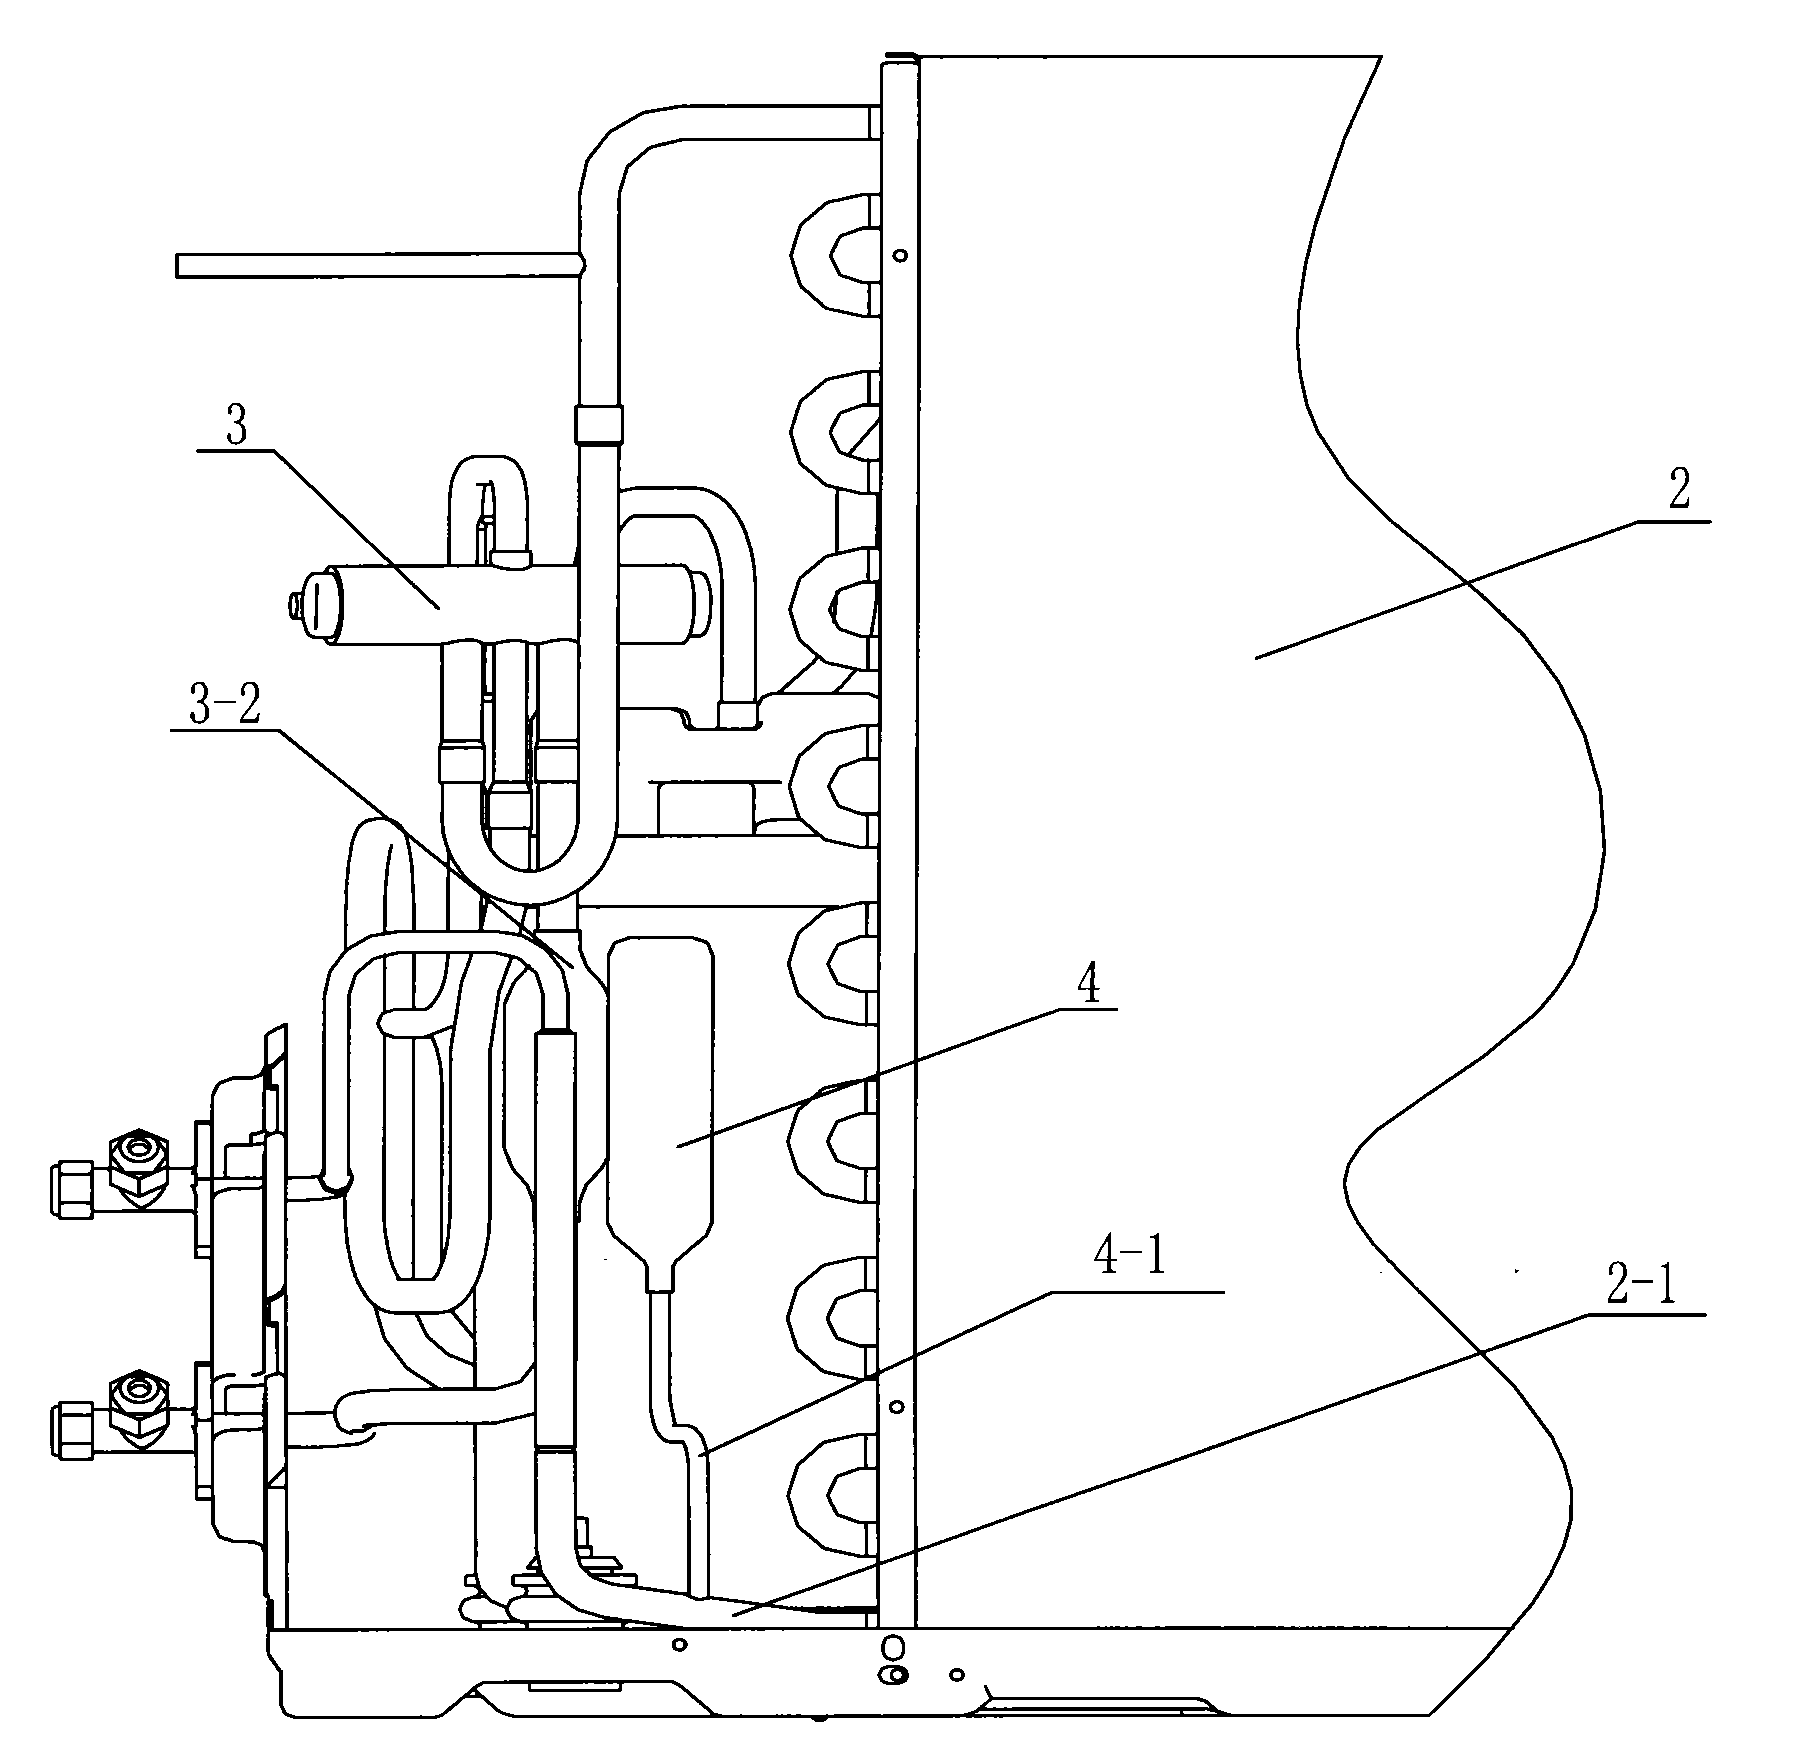 Air conditioning refrigeration circulating system and air conditioner